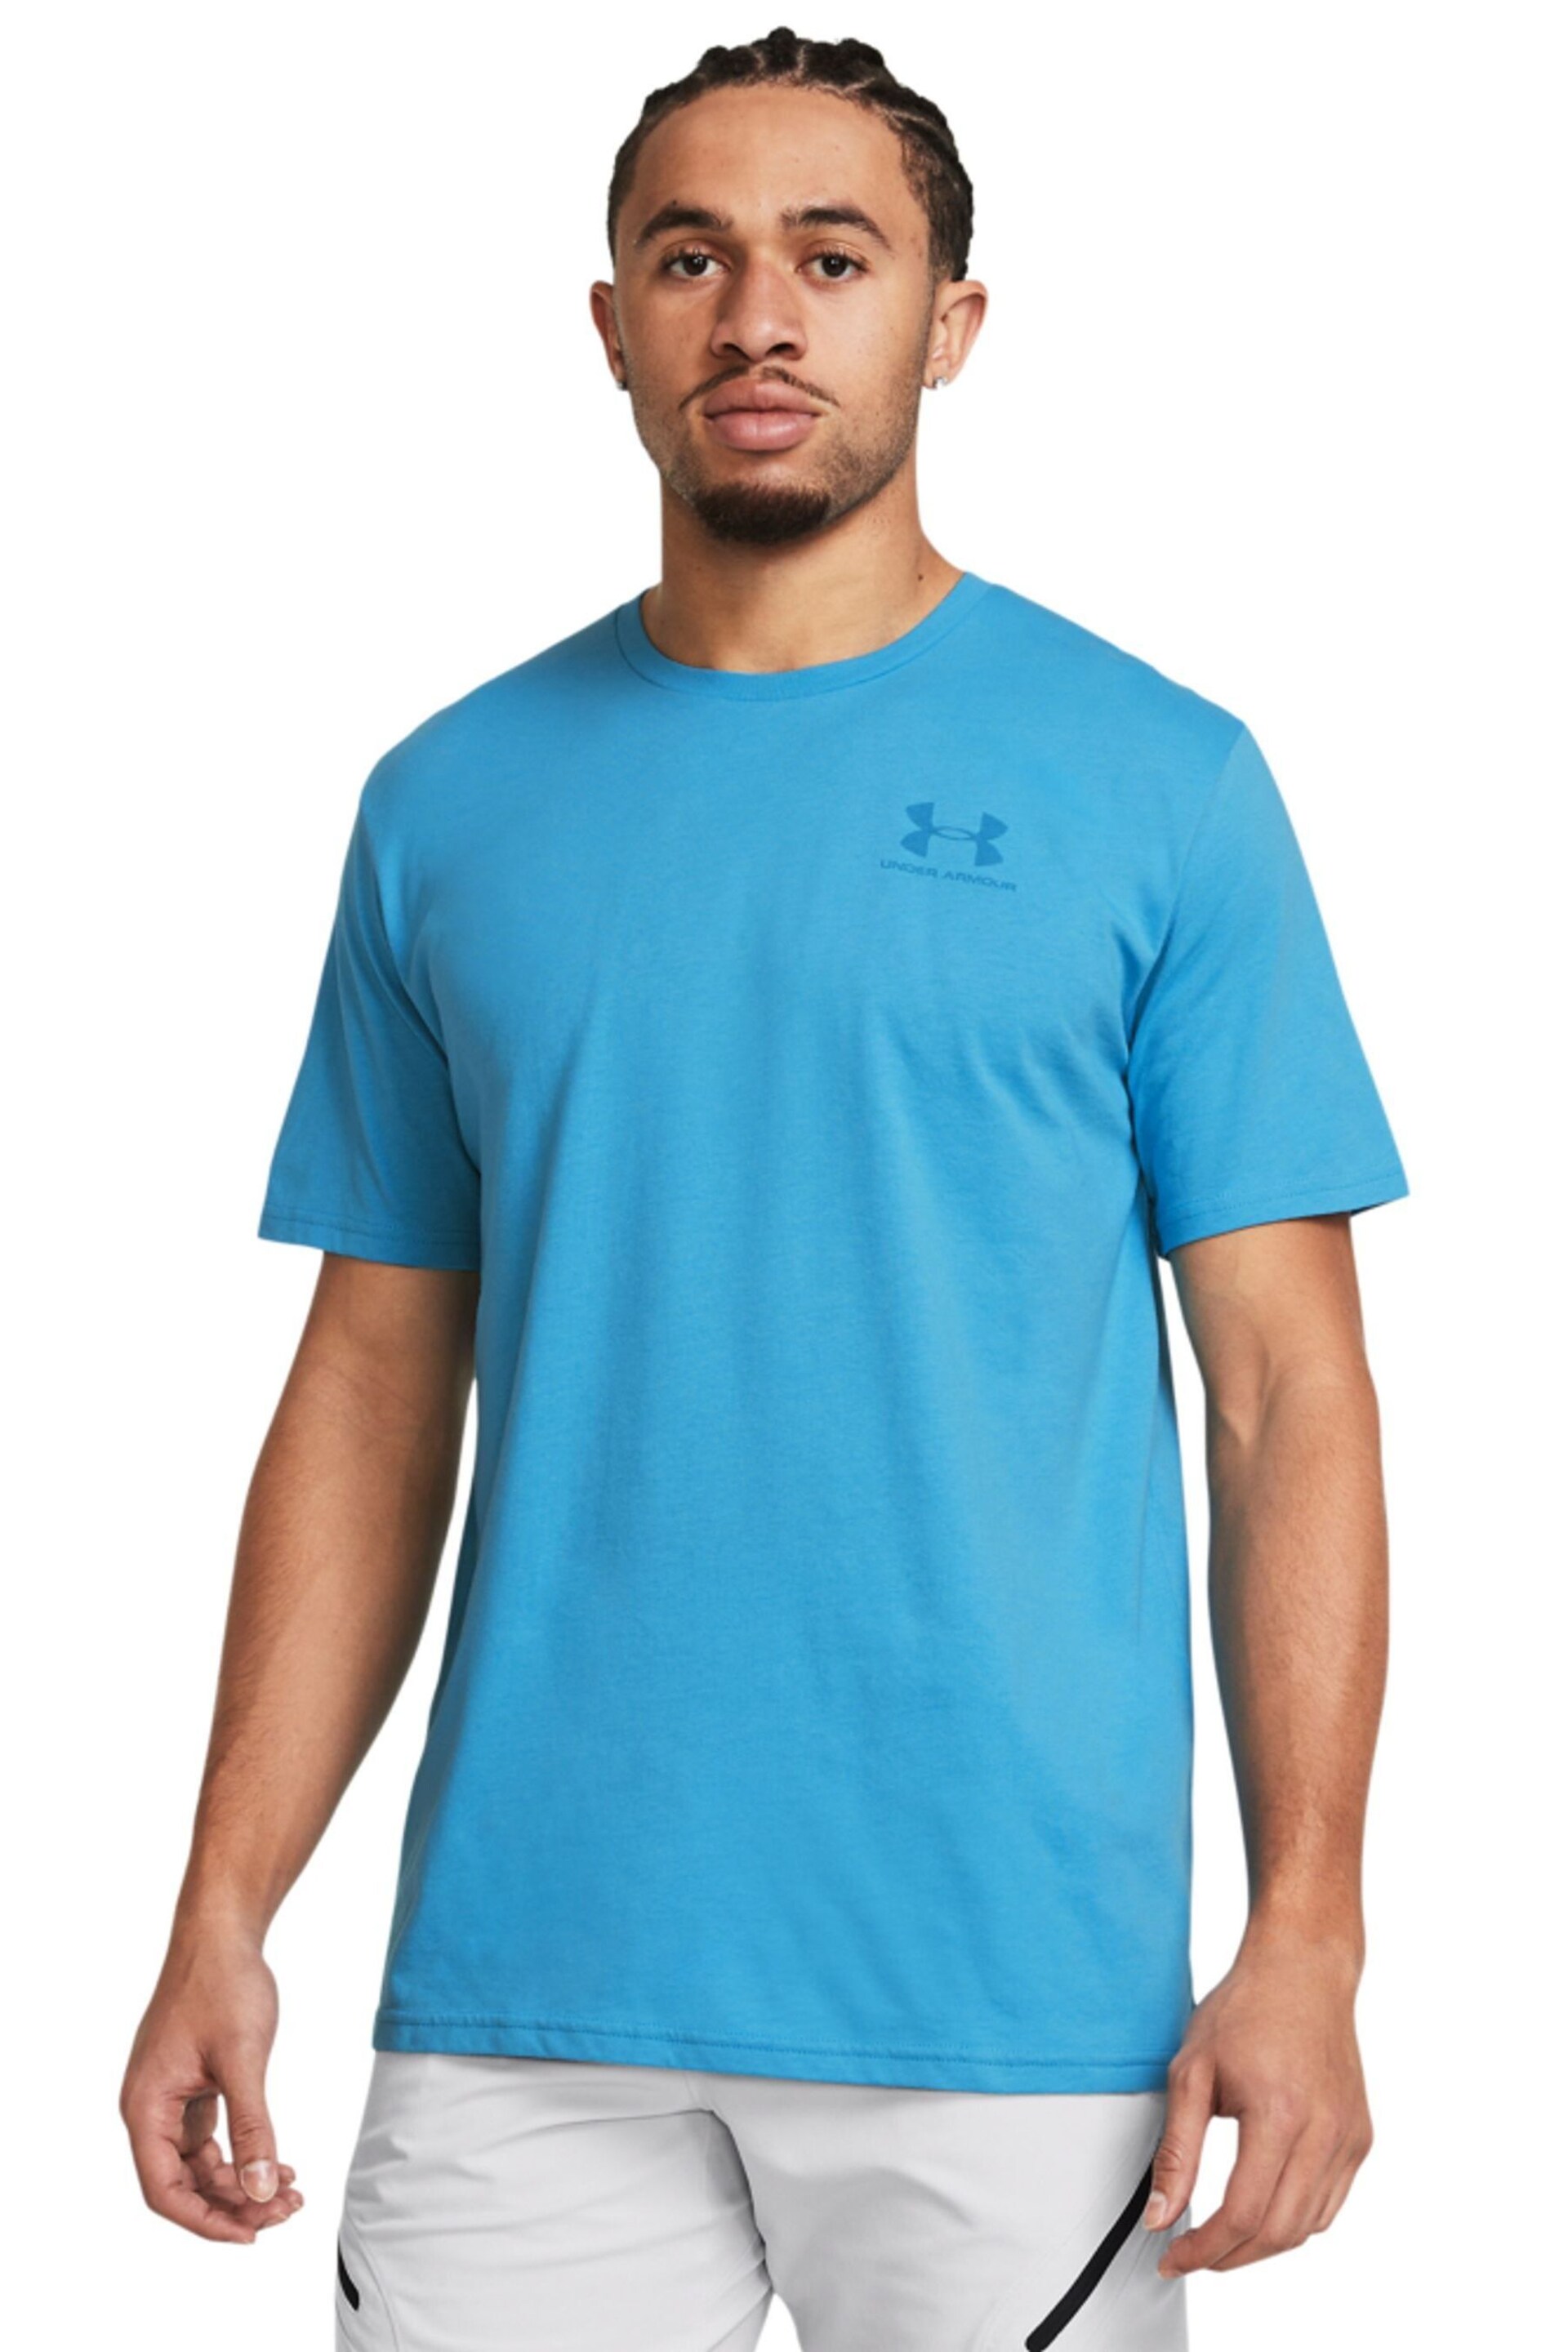 Under Armour Blue Left Chest Short Sleeve T-Shirt - Image 1 of 4